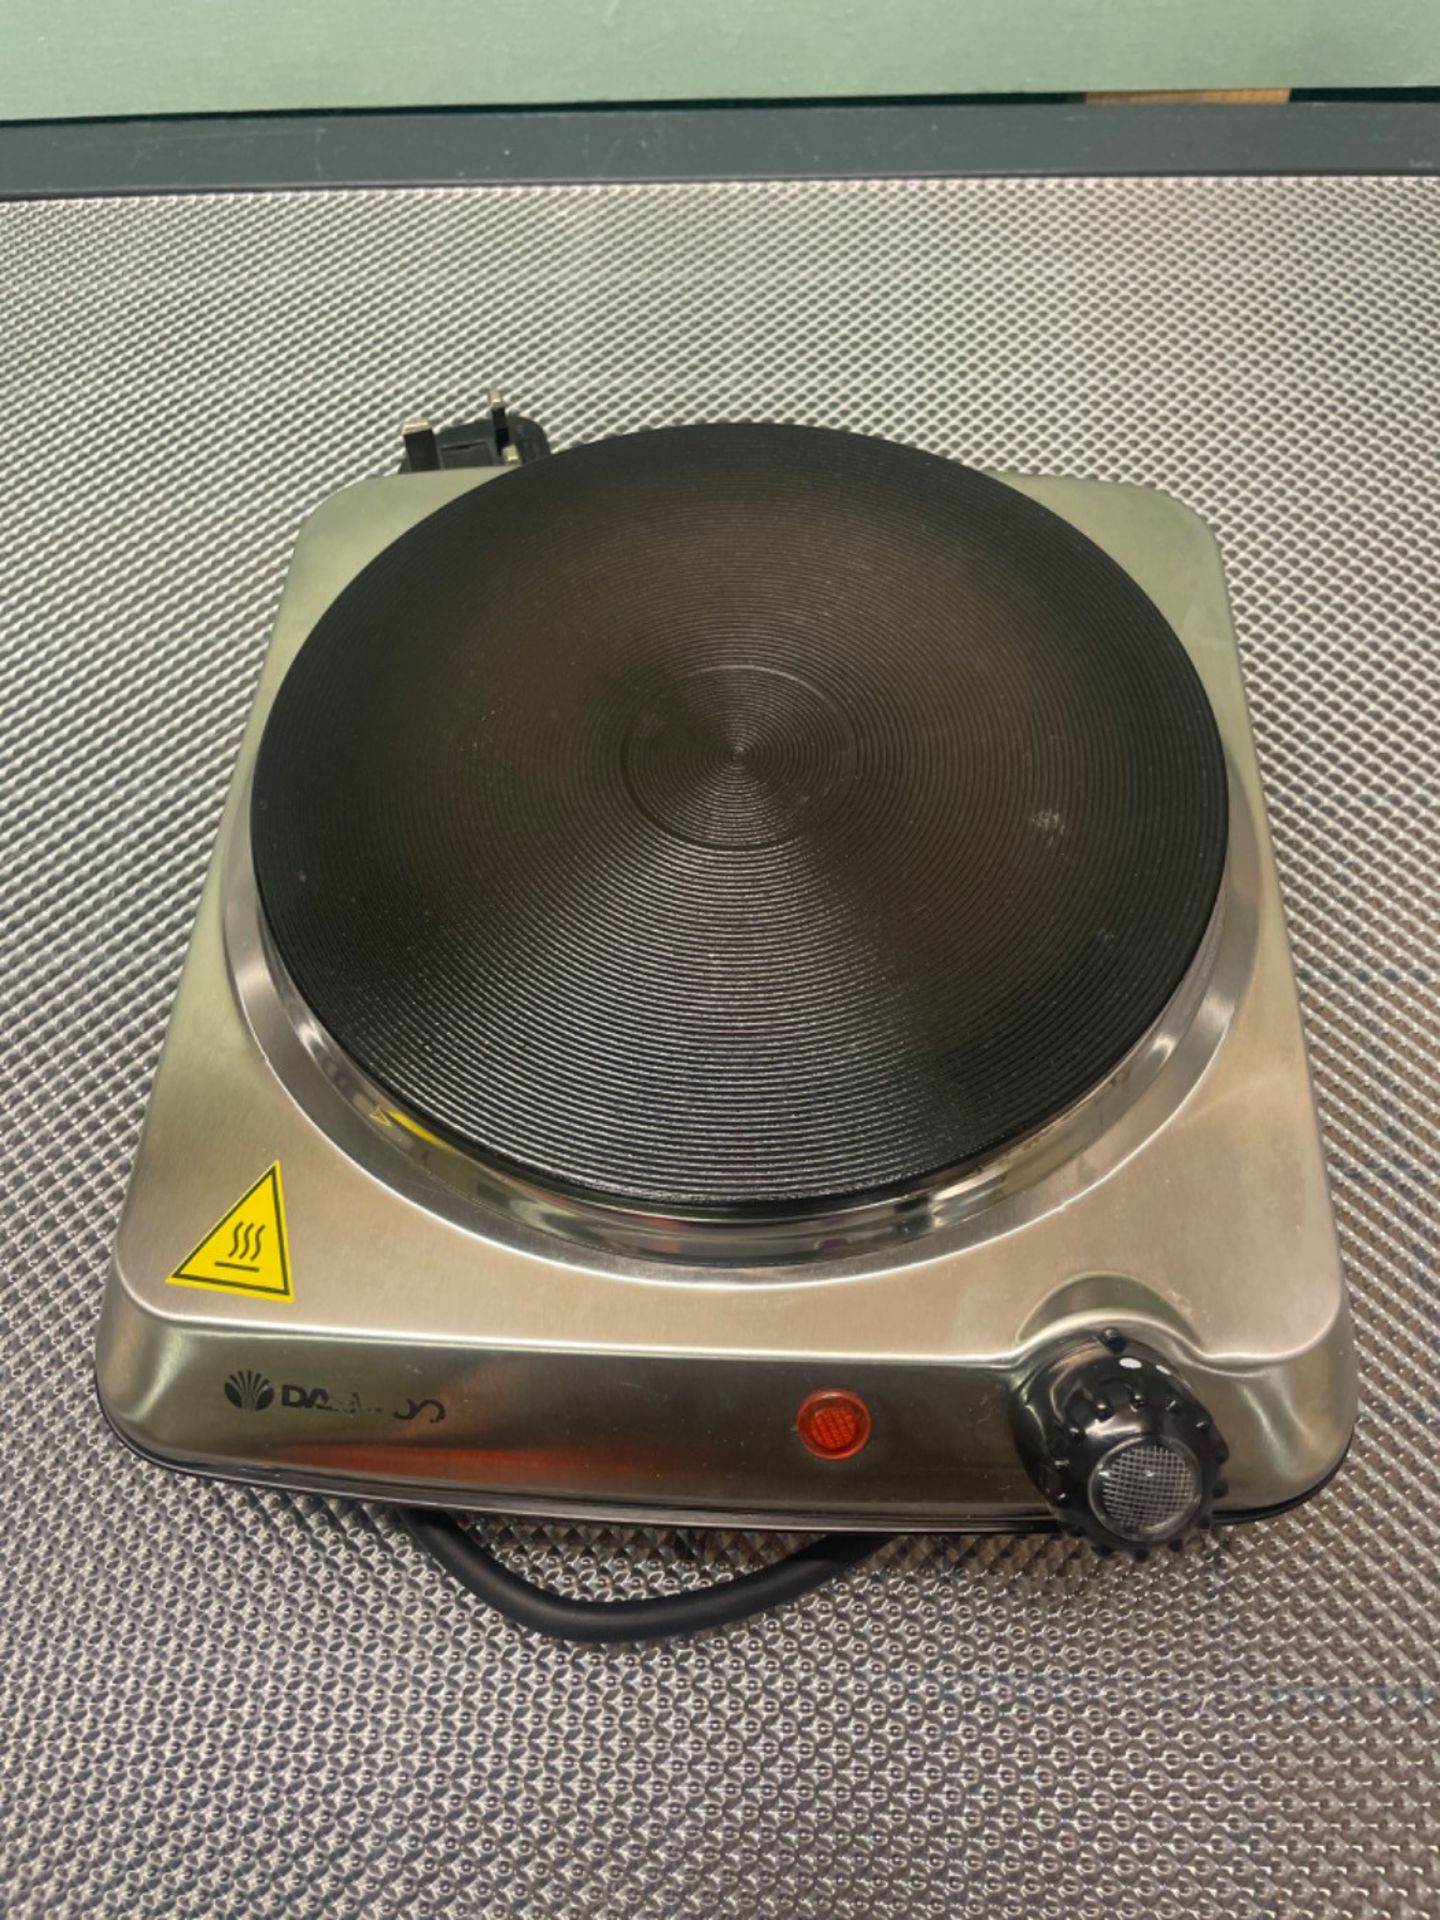 Daewoo SDA1731 Single Hot Plate-Portable & Compact-Cast Iron Heating Element-On/Off Indicator Light - Image 2 of 3